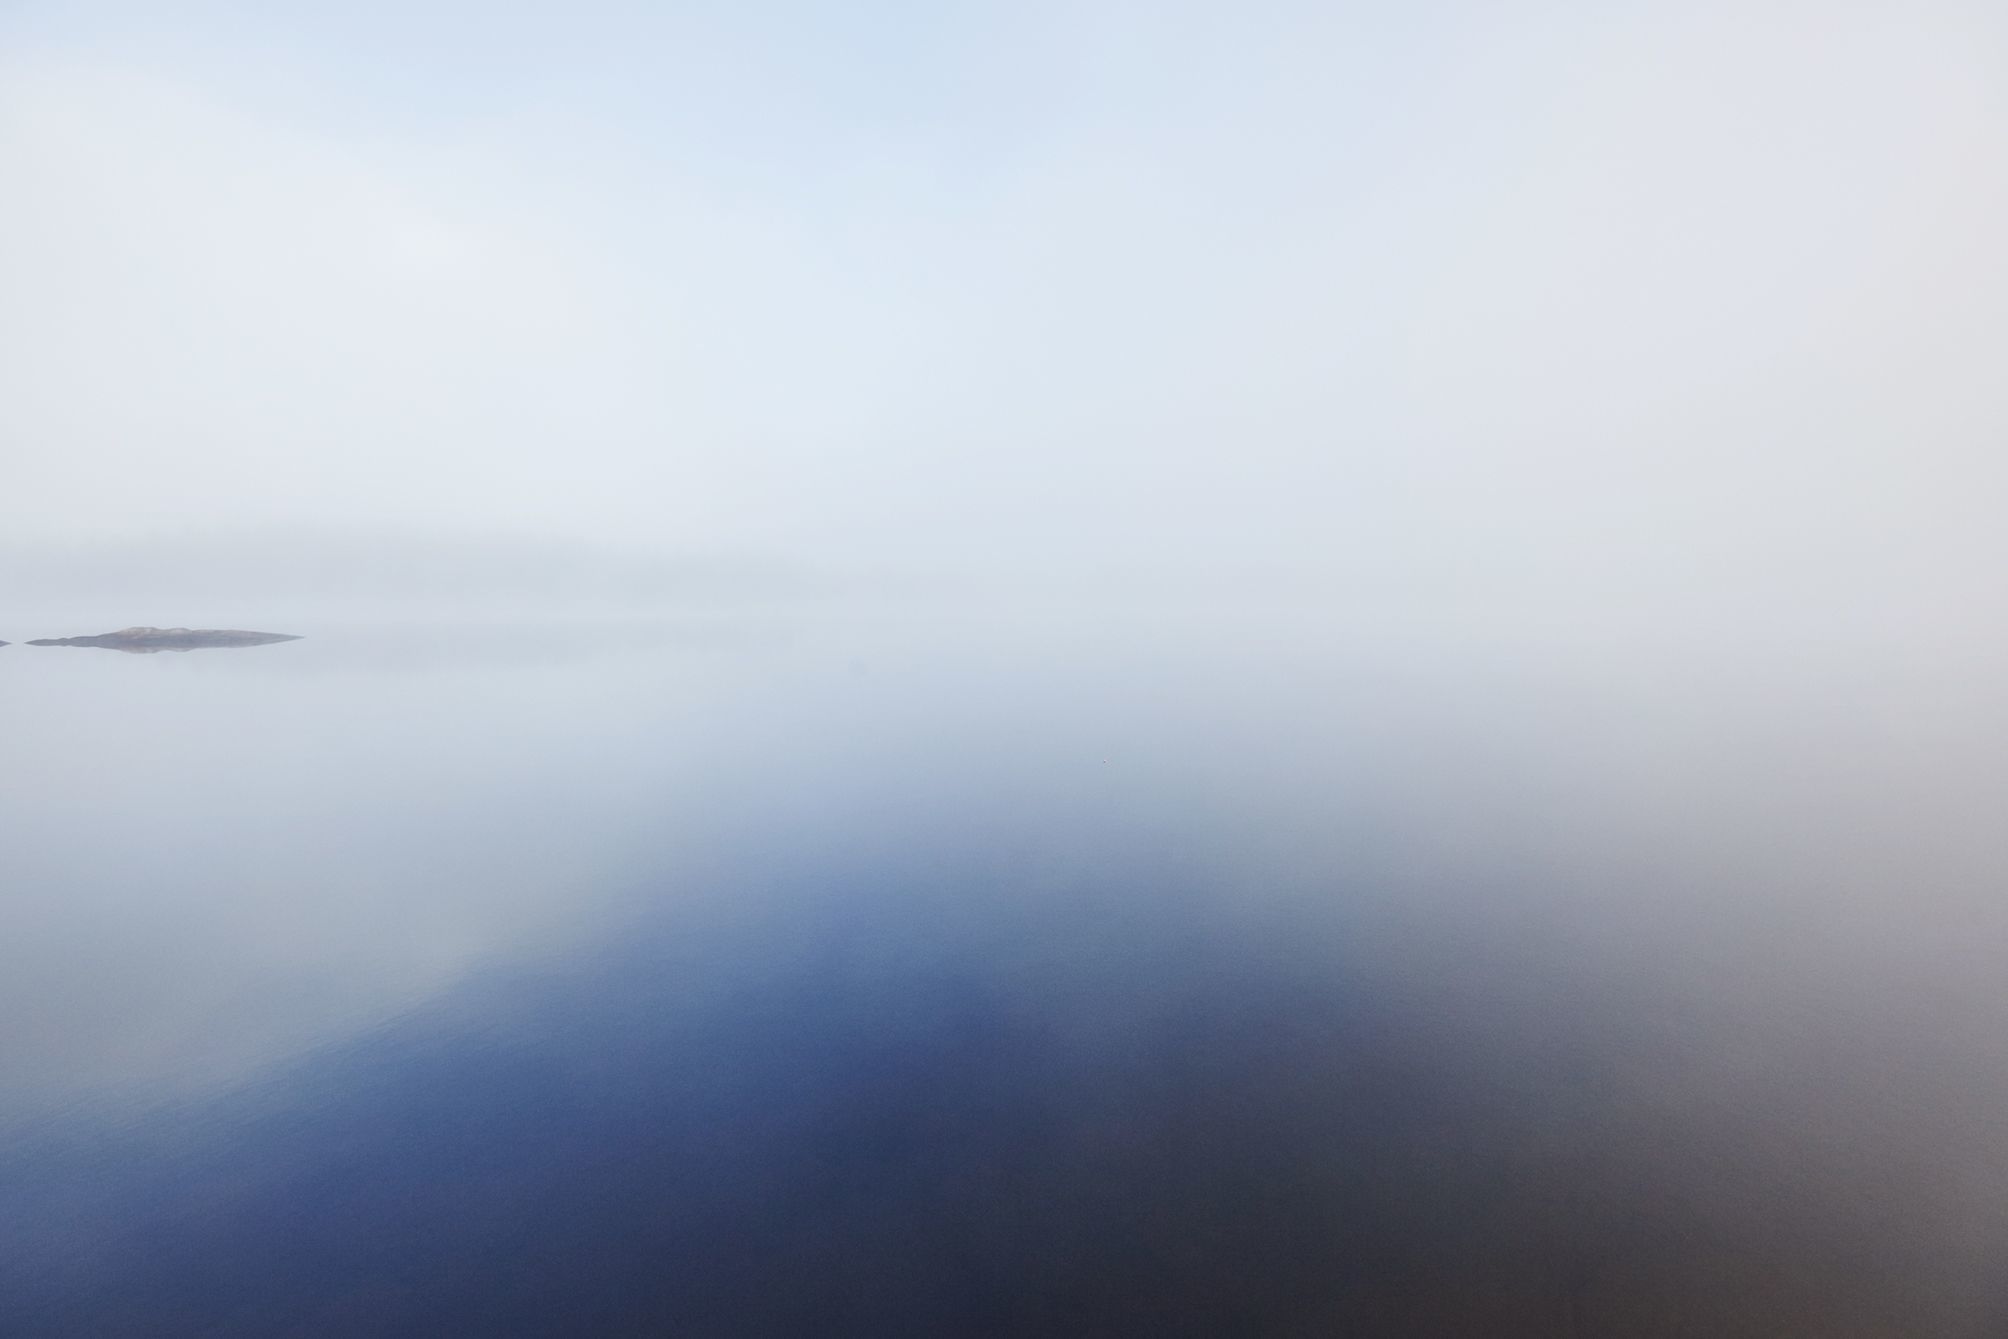 Misty image of a lake at dawn